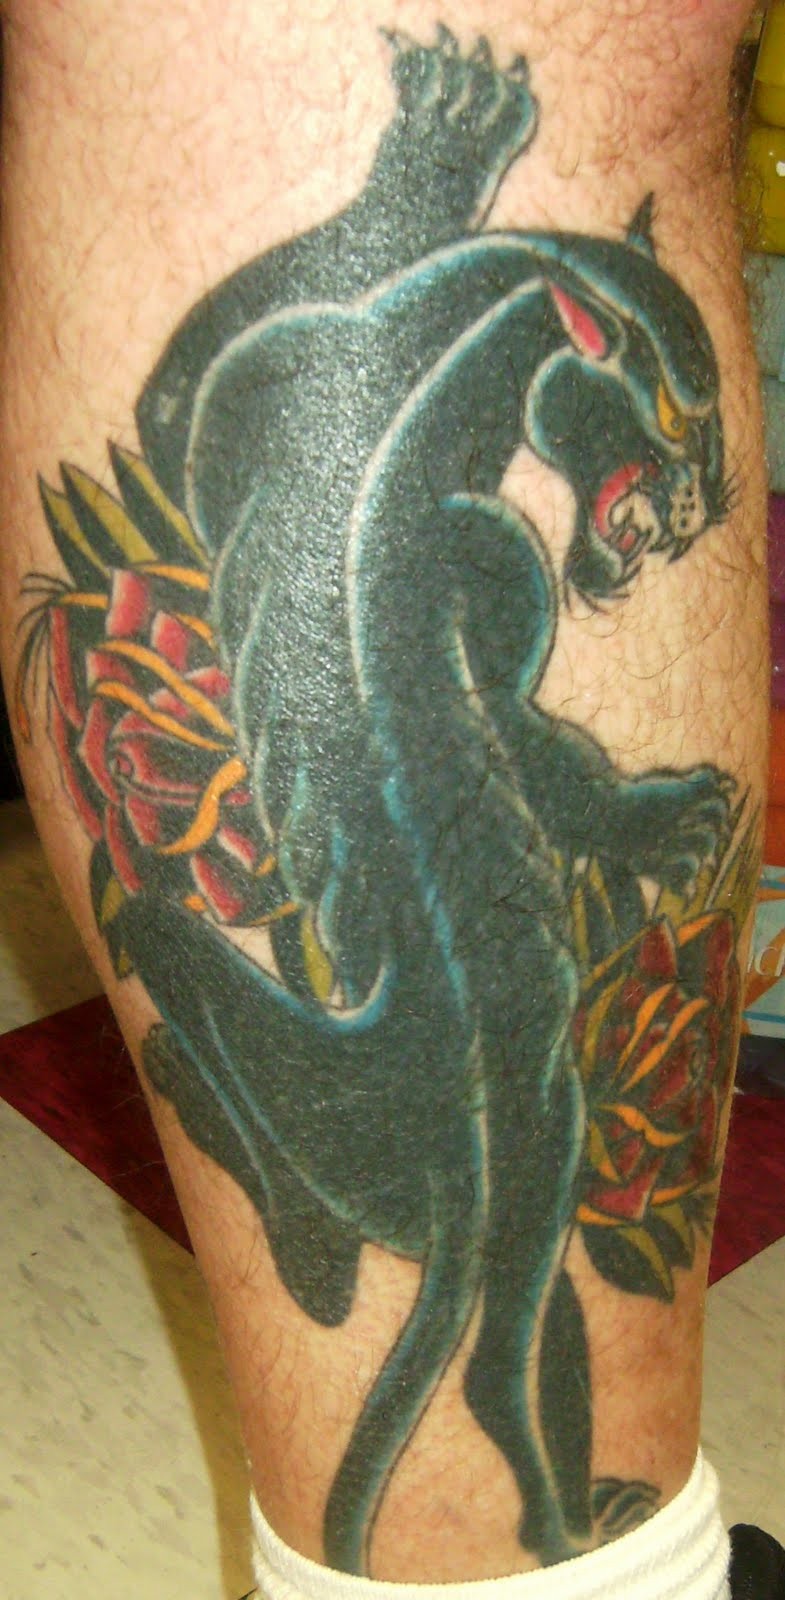 Black panther and roses tattoo on leg